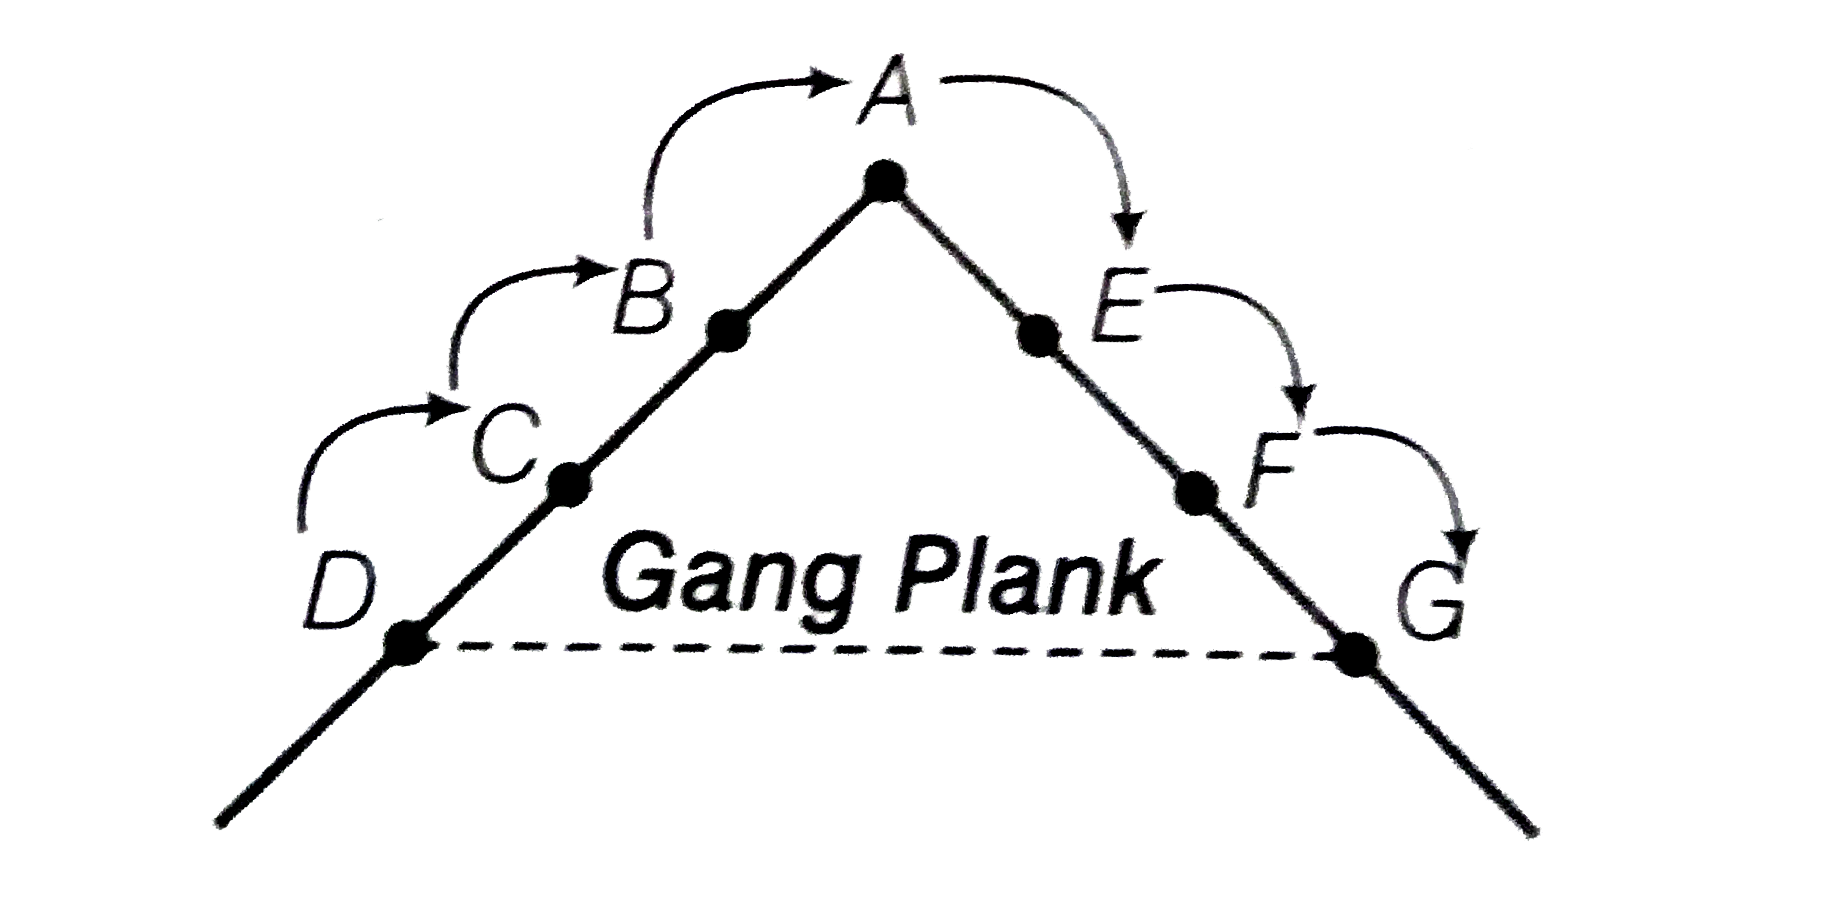 Explain the principle of scalar chain and gang plank